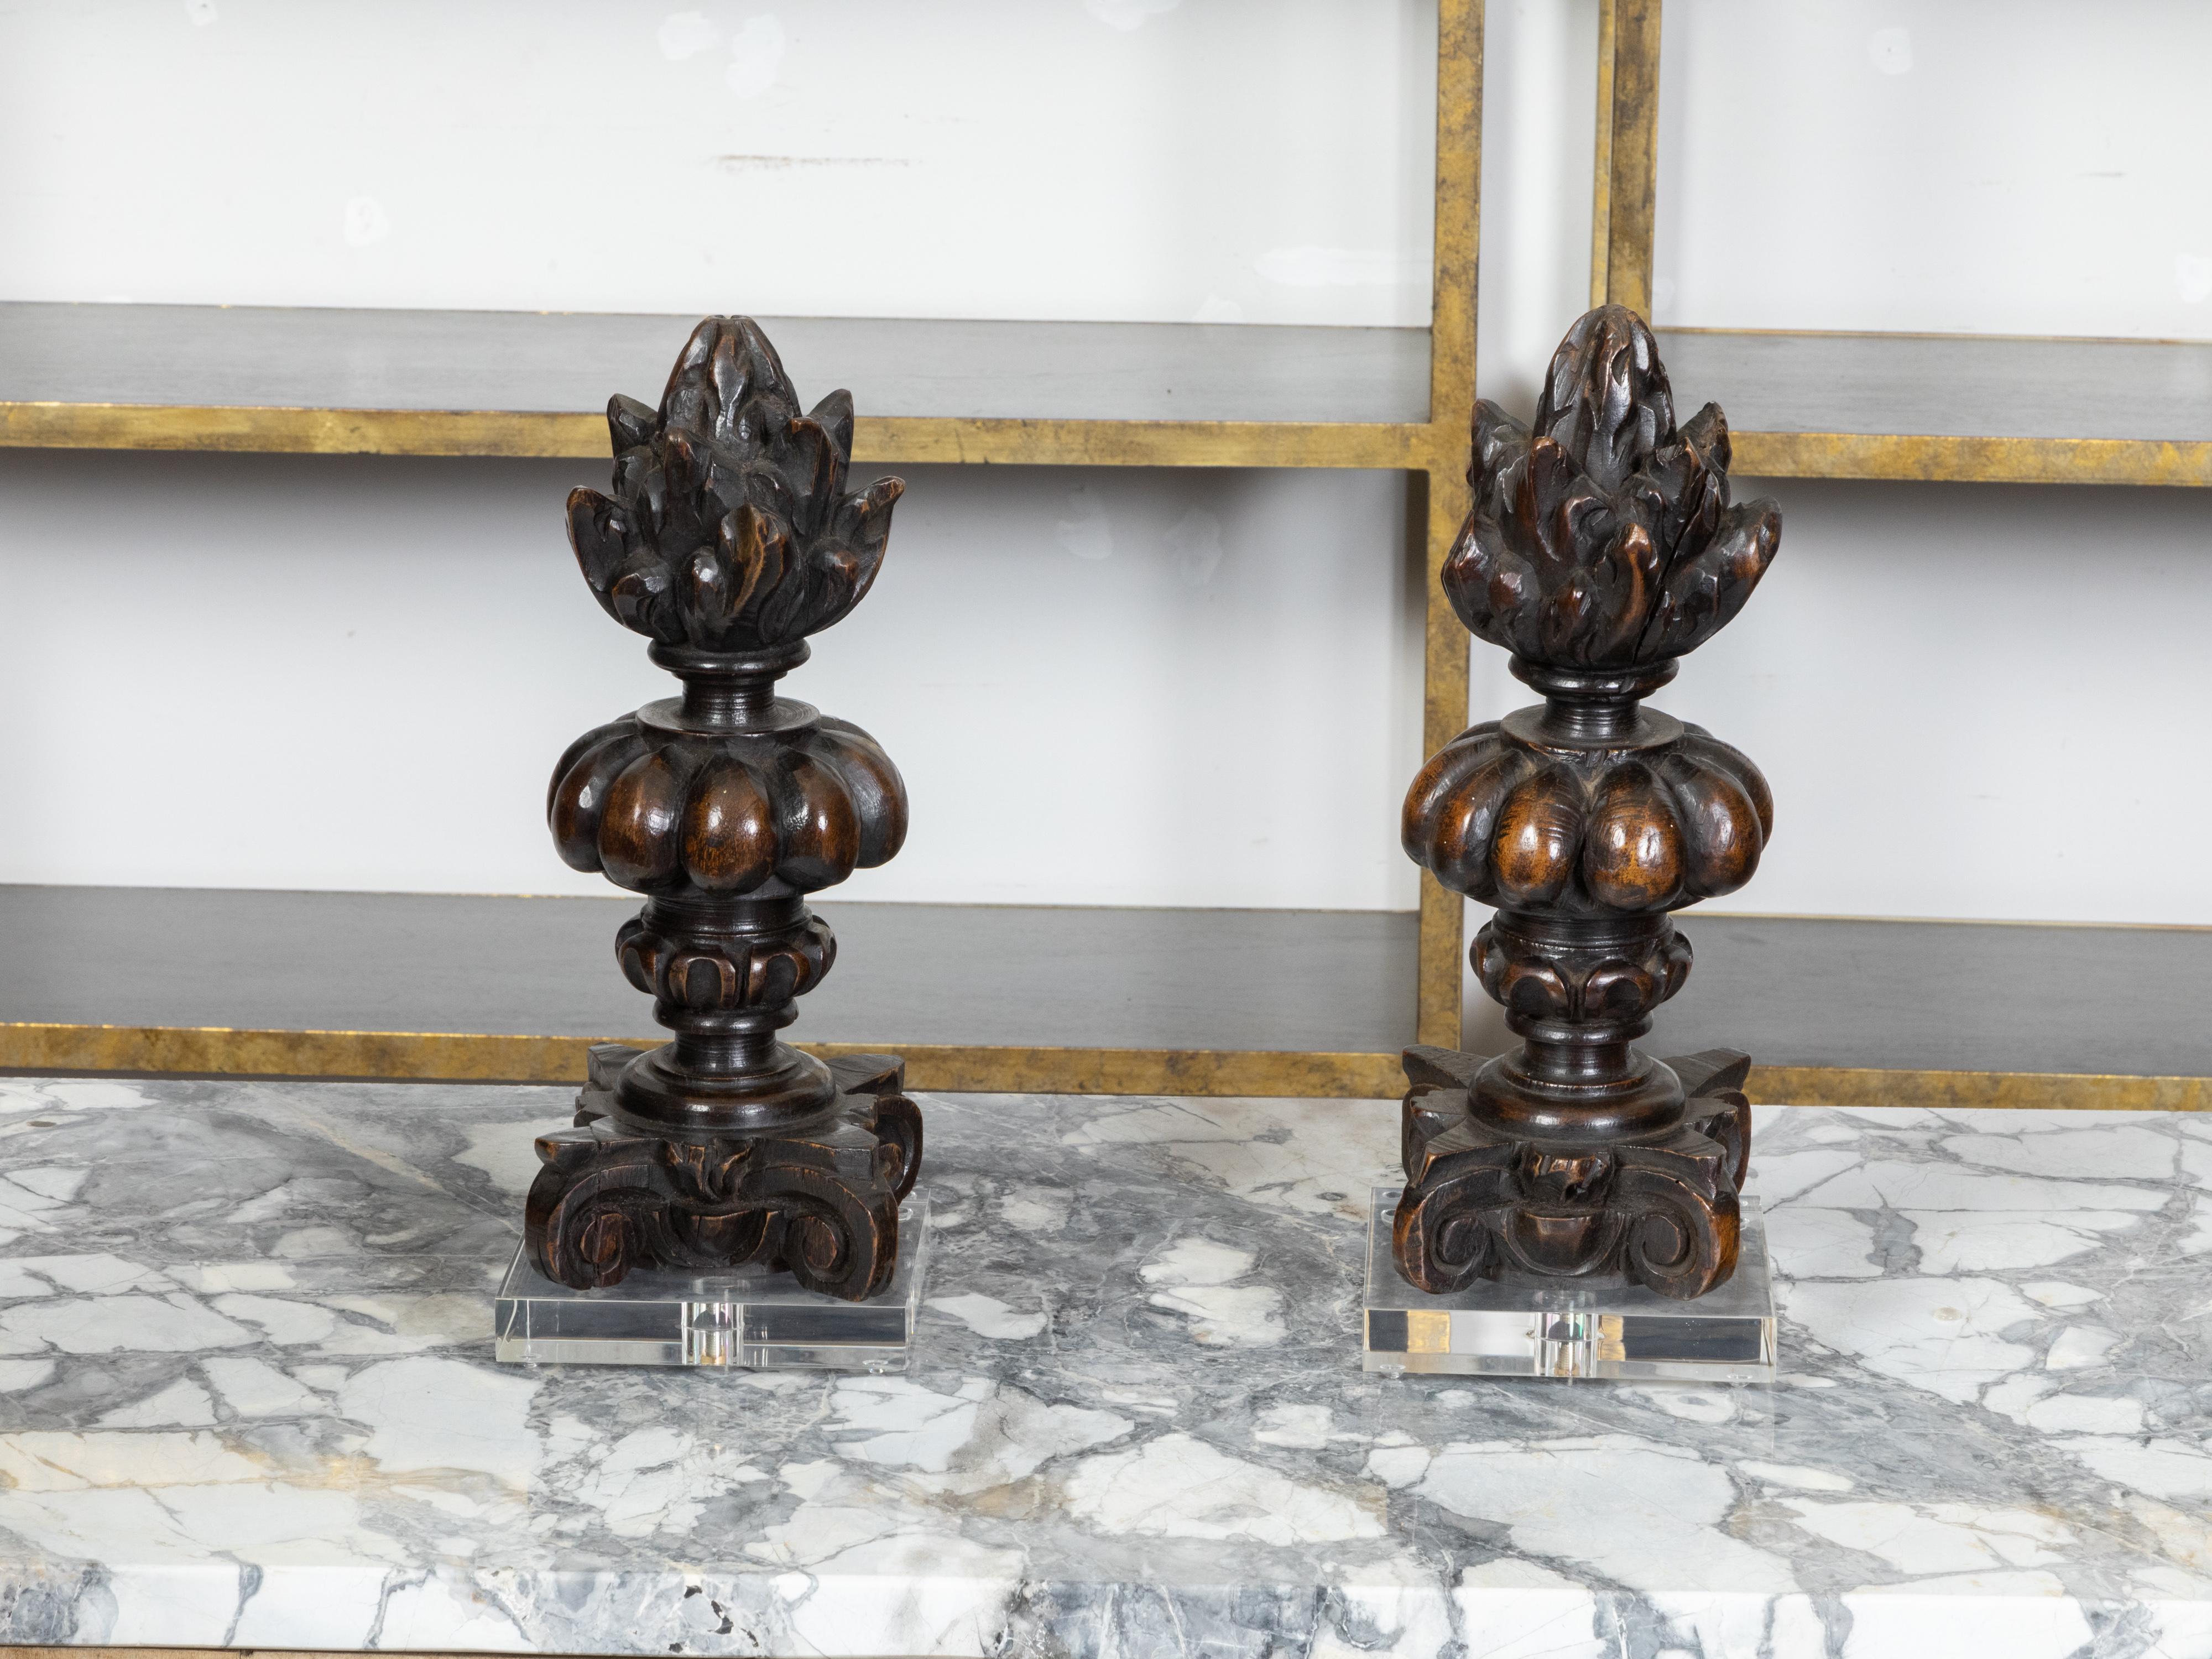 A pair of Italian carved wooden pots à feu (fire urn) fragment sculptures from the 19th century, mounted on modern square shaped lucite bases. Created in Italy during the 19th century, each of this pair of wooden sculptures depicts a pot à feu, an